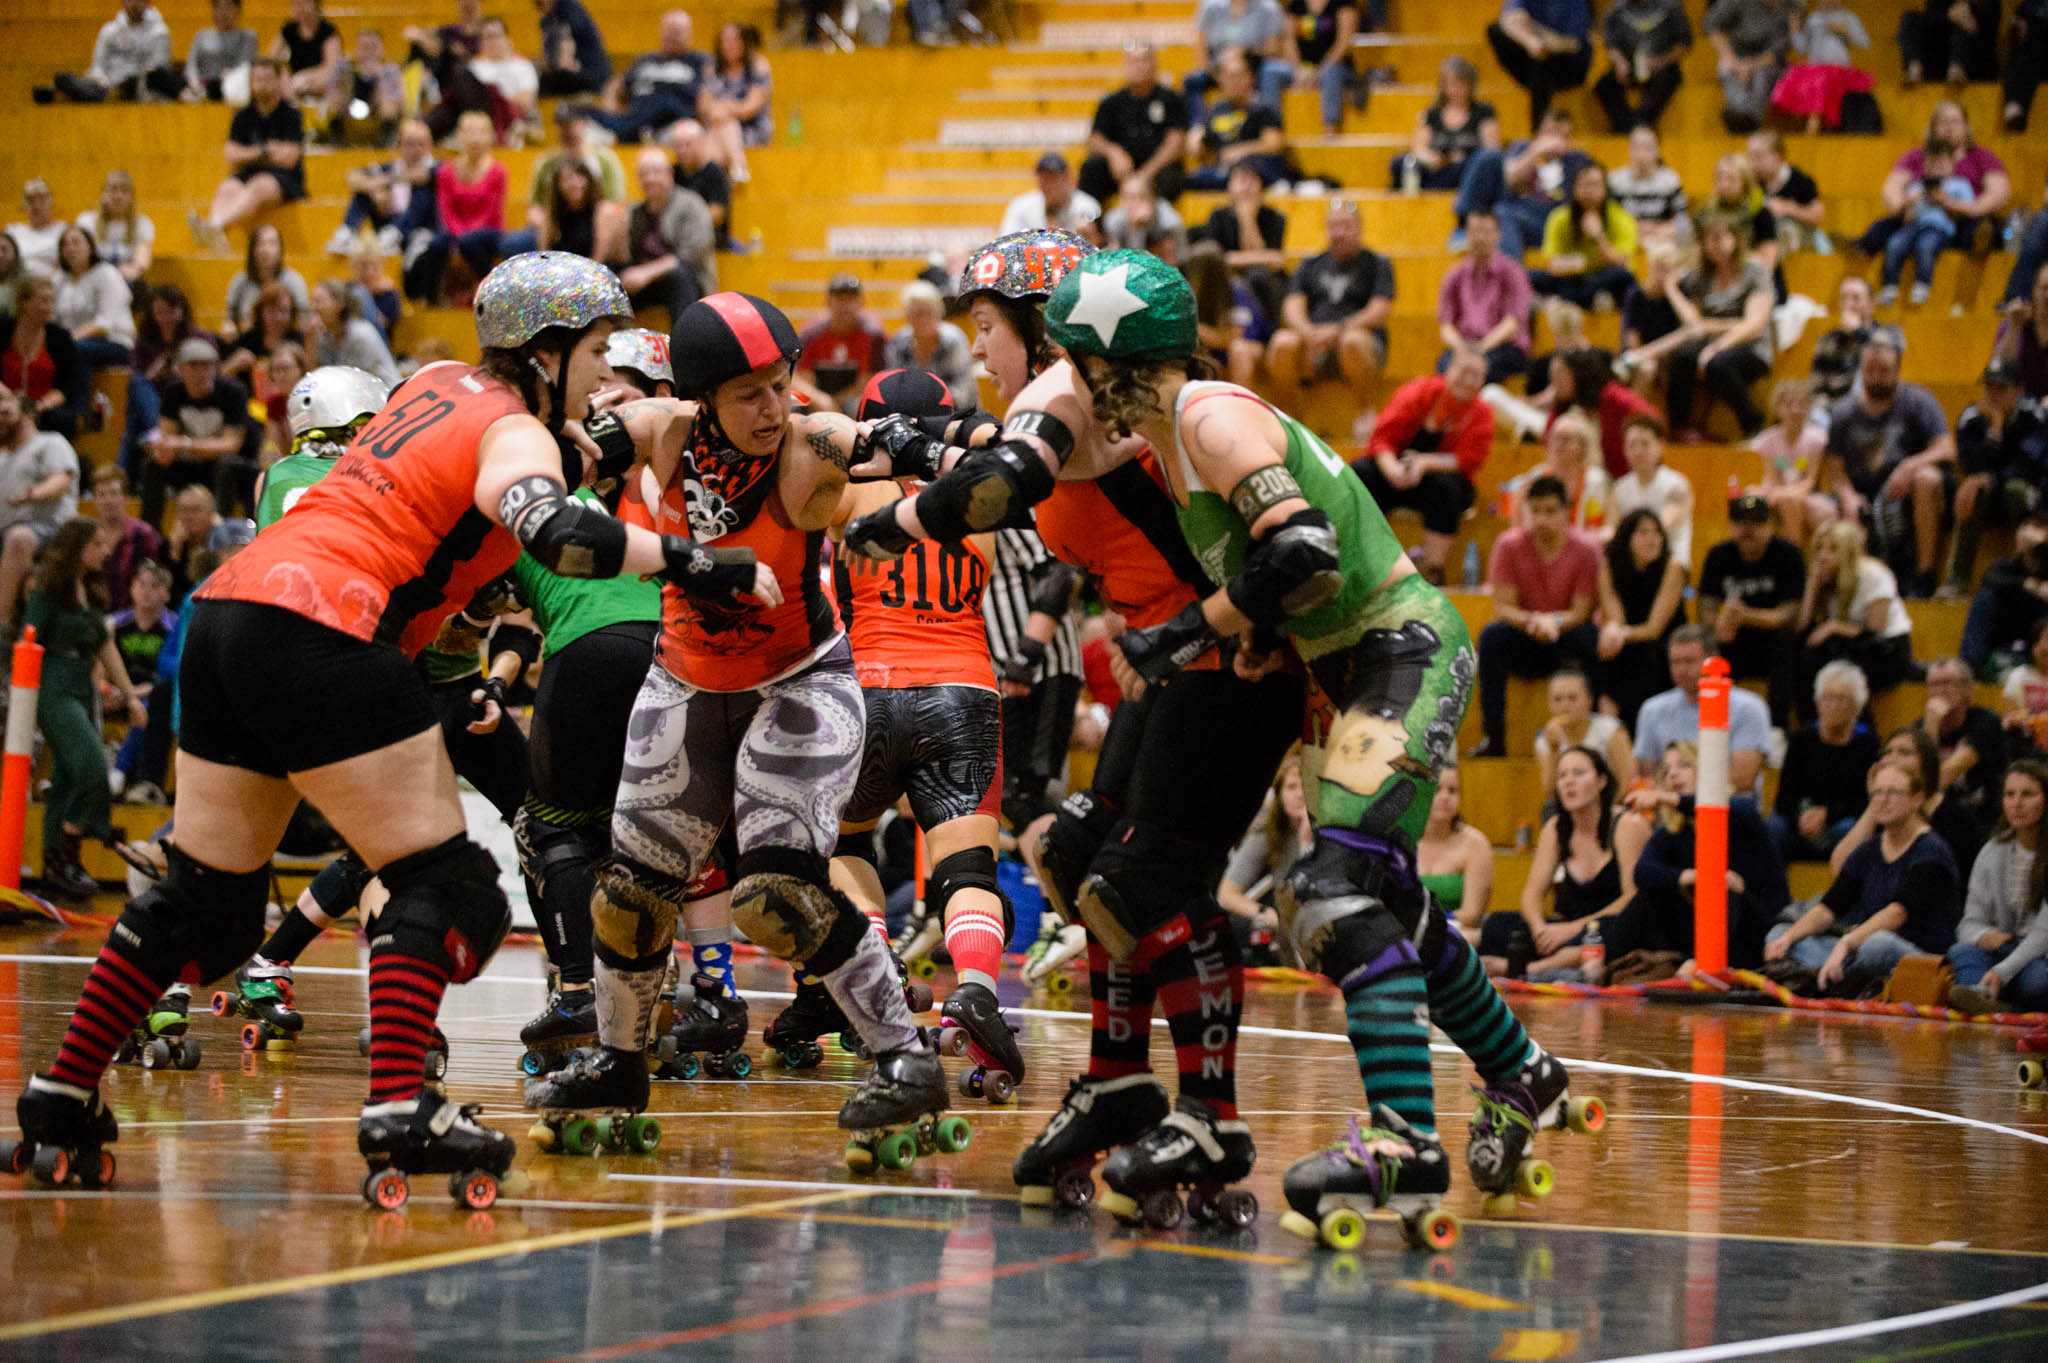 CRDL - Surly Griffins v Red Bellied Black Hearts. Photographer: Brett Sargeant, D-eye Photography